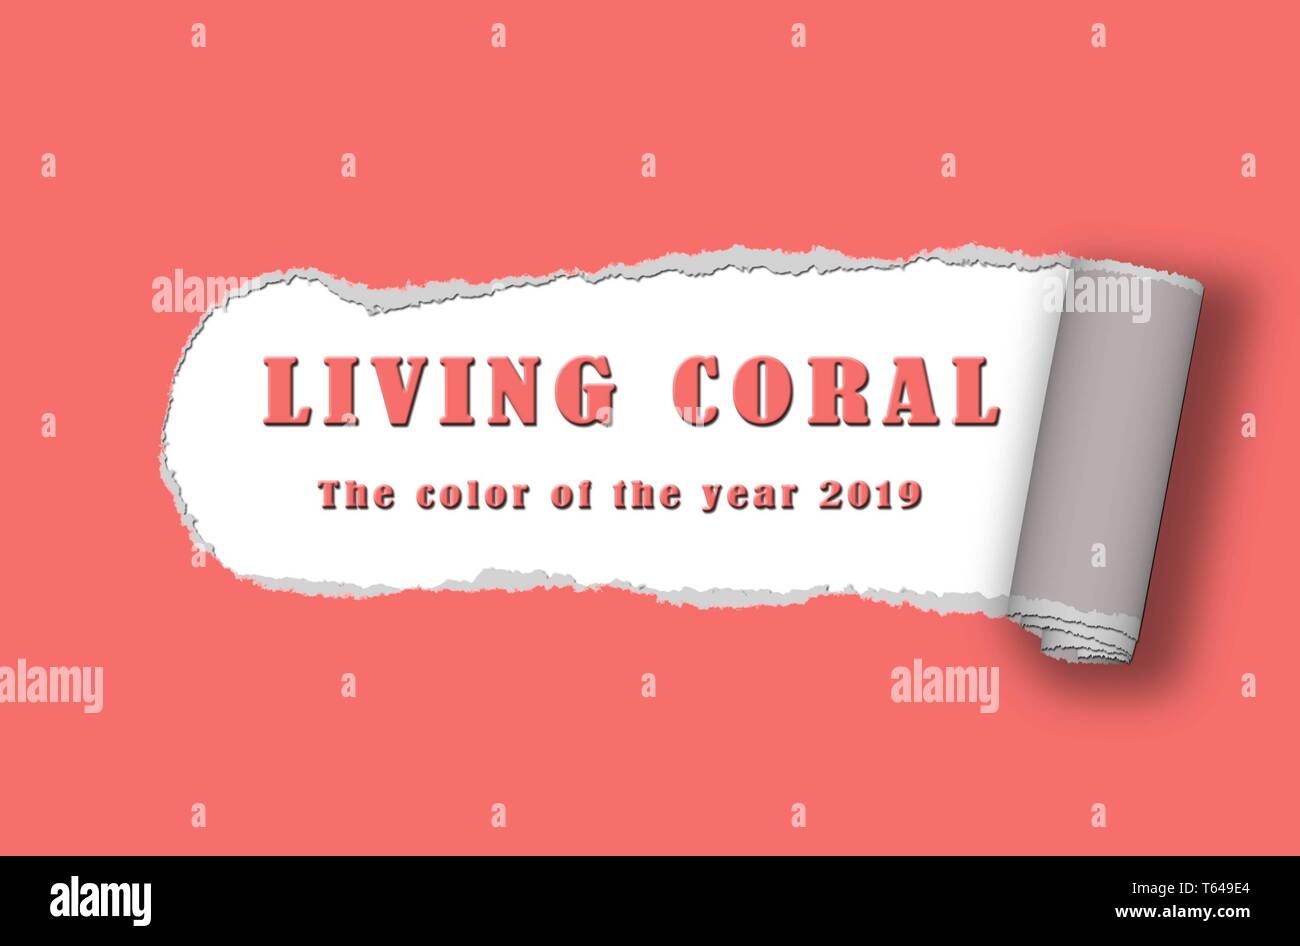 Text - Colour of the year 2019, Living Coral - on coral ripped paper background Stock Photo